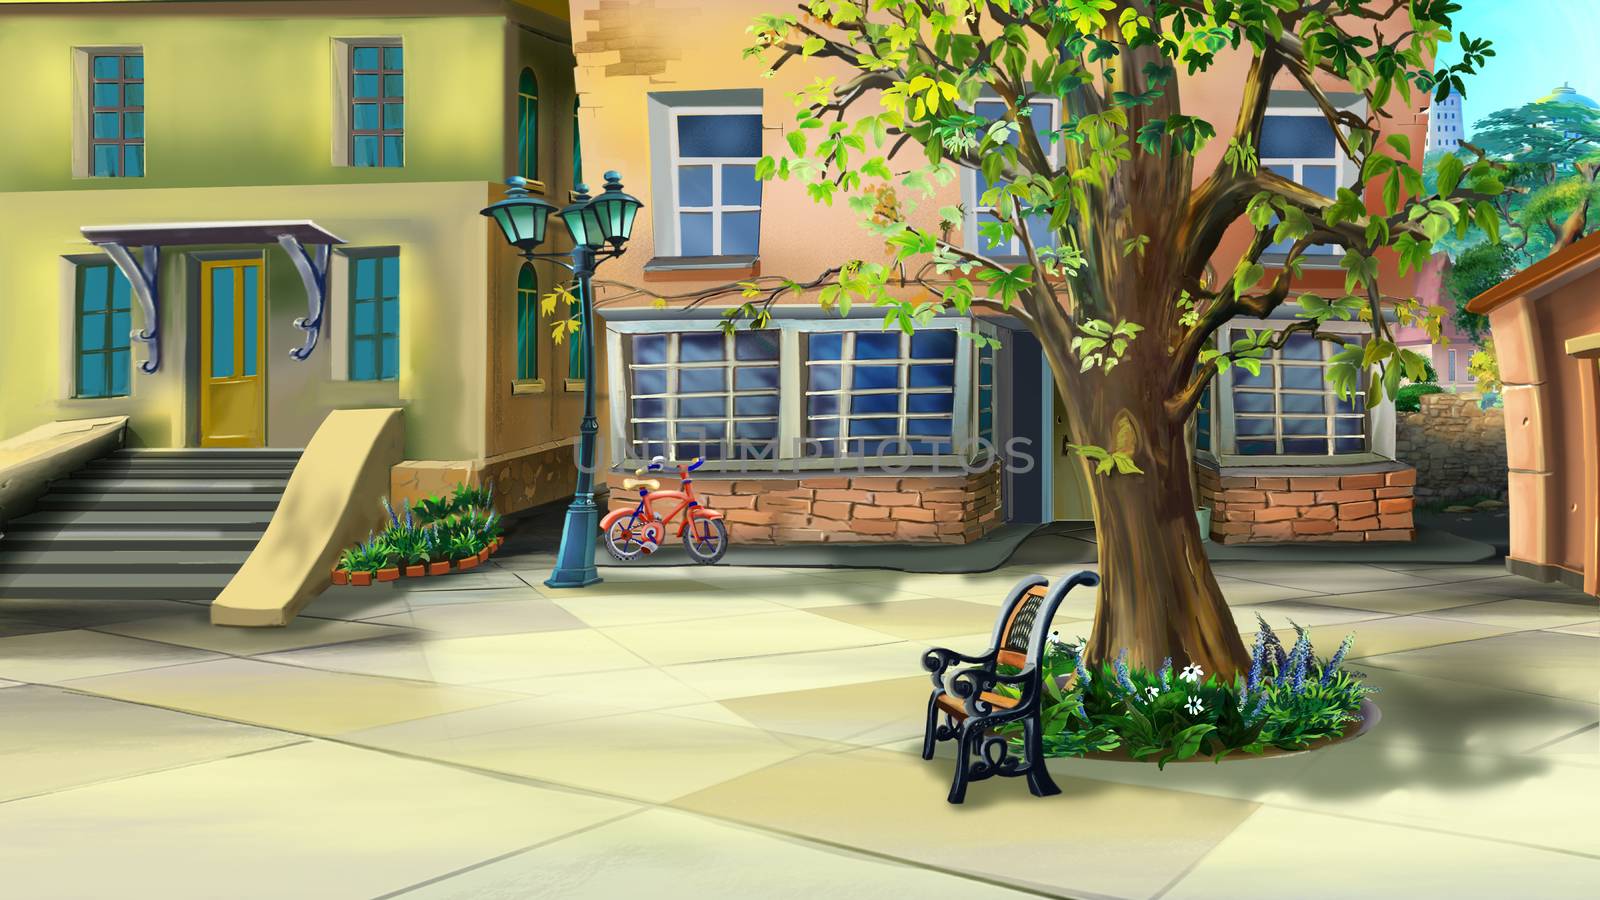 Courtyard with Tree and Bench. Back  View by Multipedia